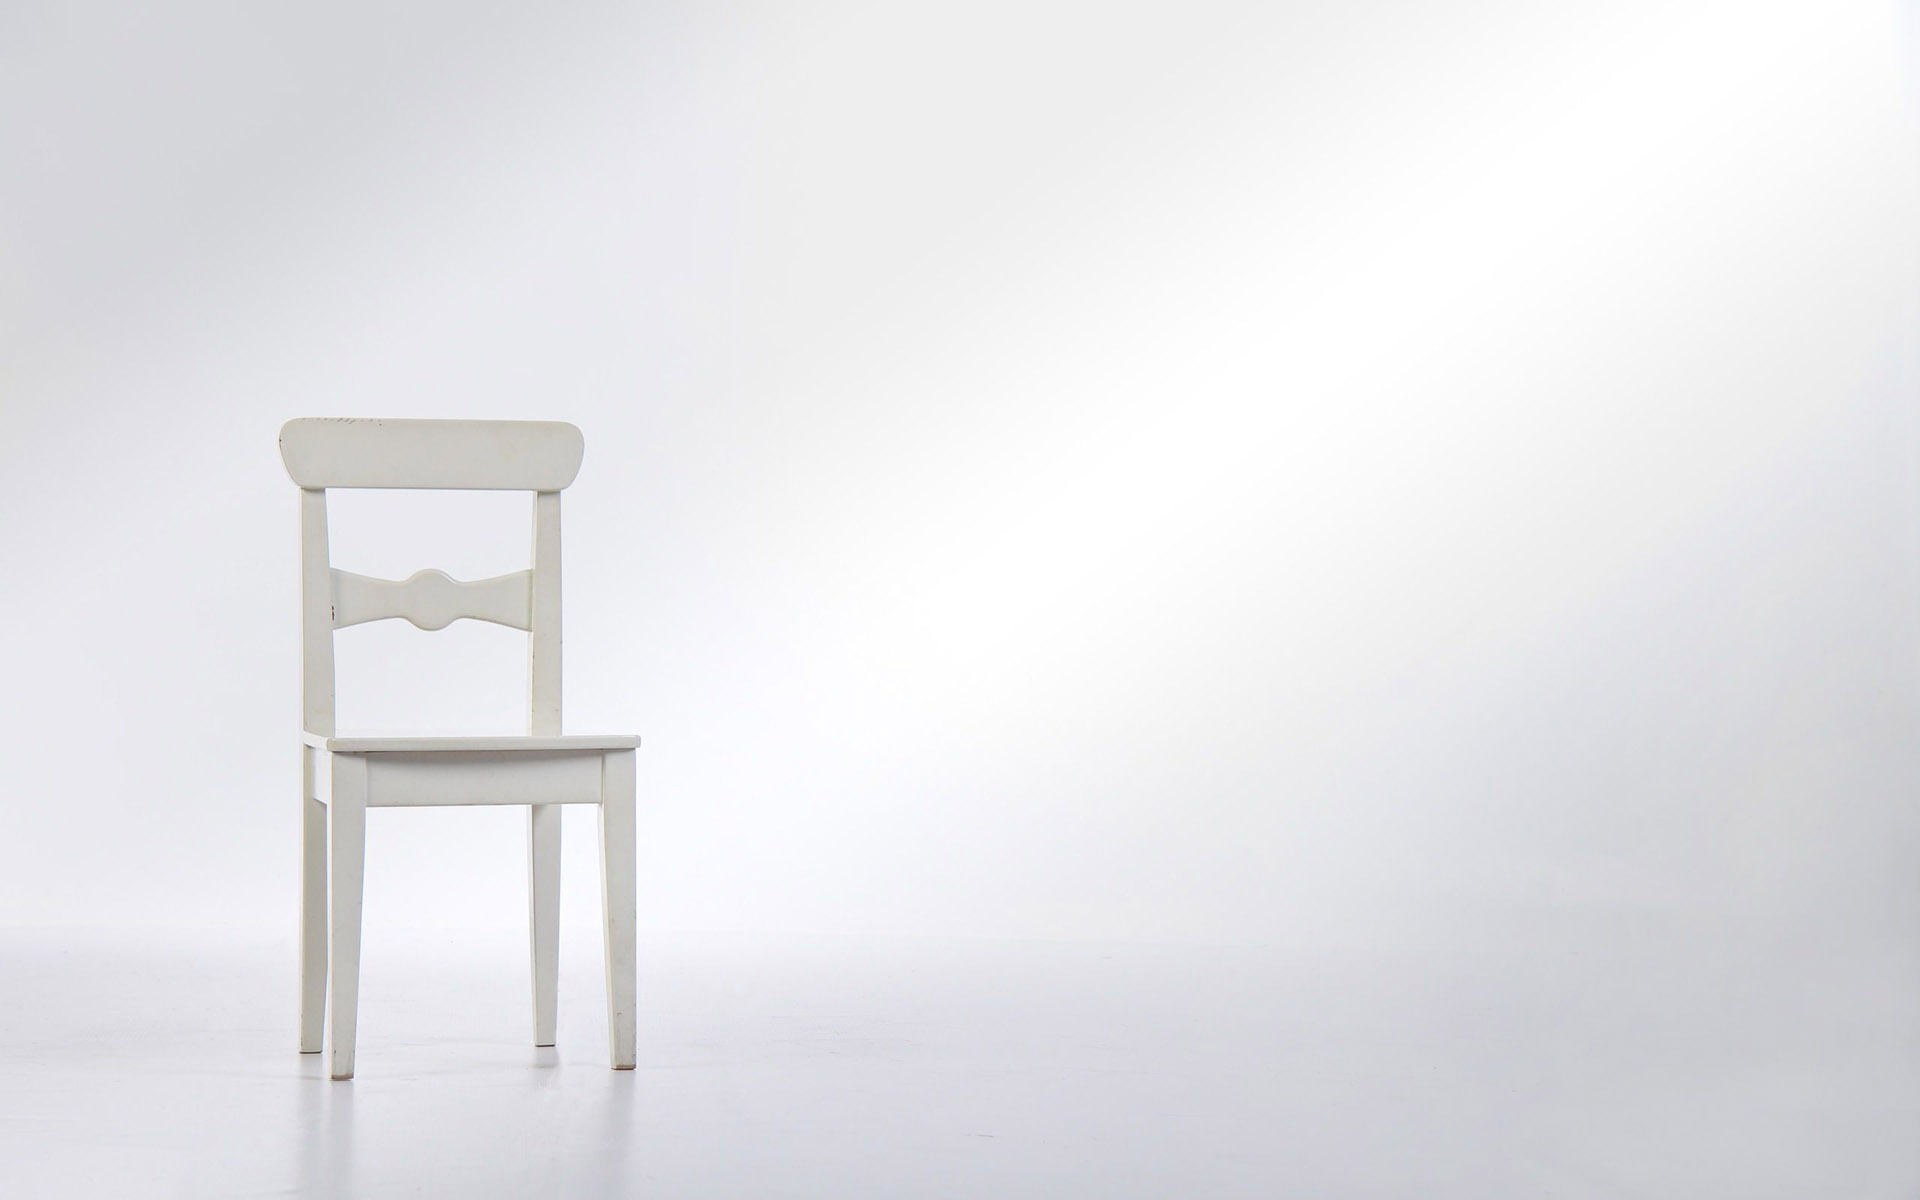 13 Fantastic Hd Chair Wallpapers - Chair In White Room - 1920x1200 Wallpaper  